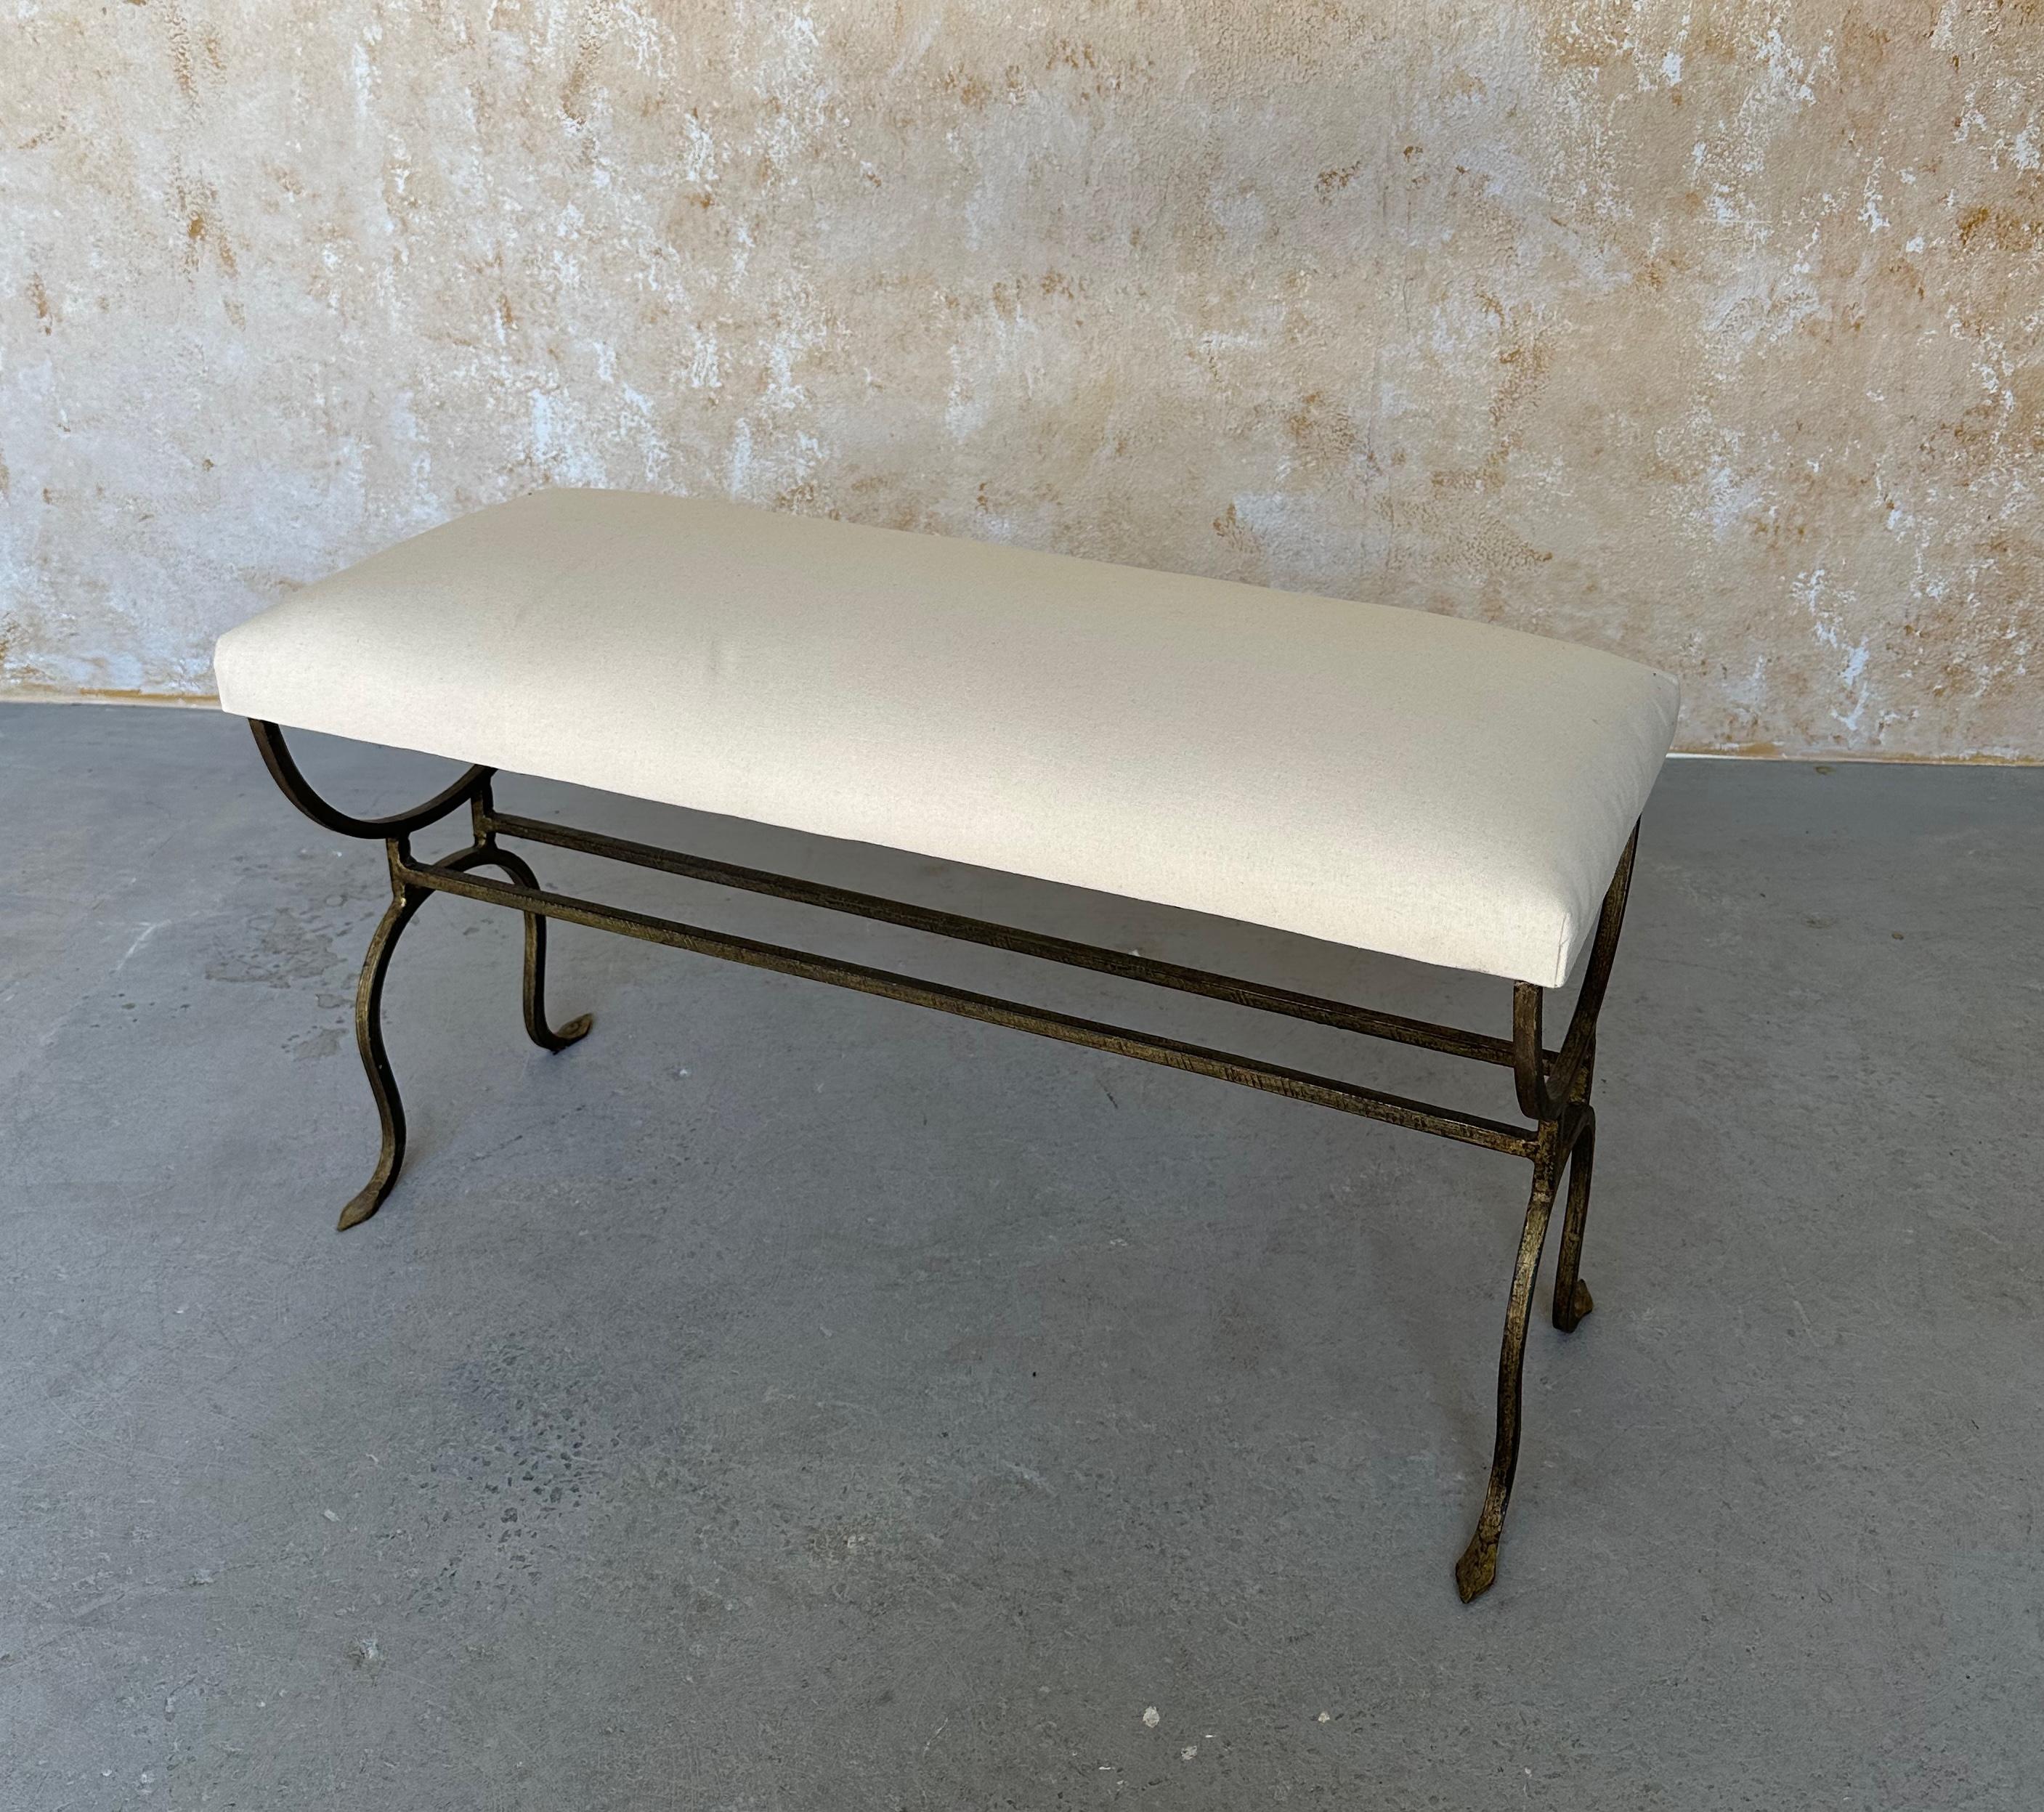 An elegant small scale bench made of forge iron with a hand applied burnished gilt finish. The seat is currently in muslin and it is ready to be upholstered. 